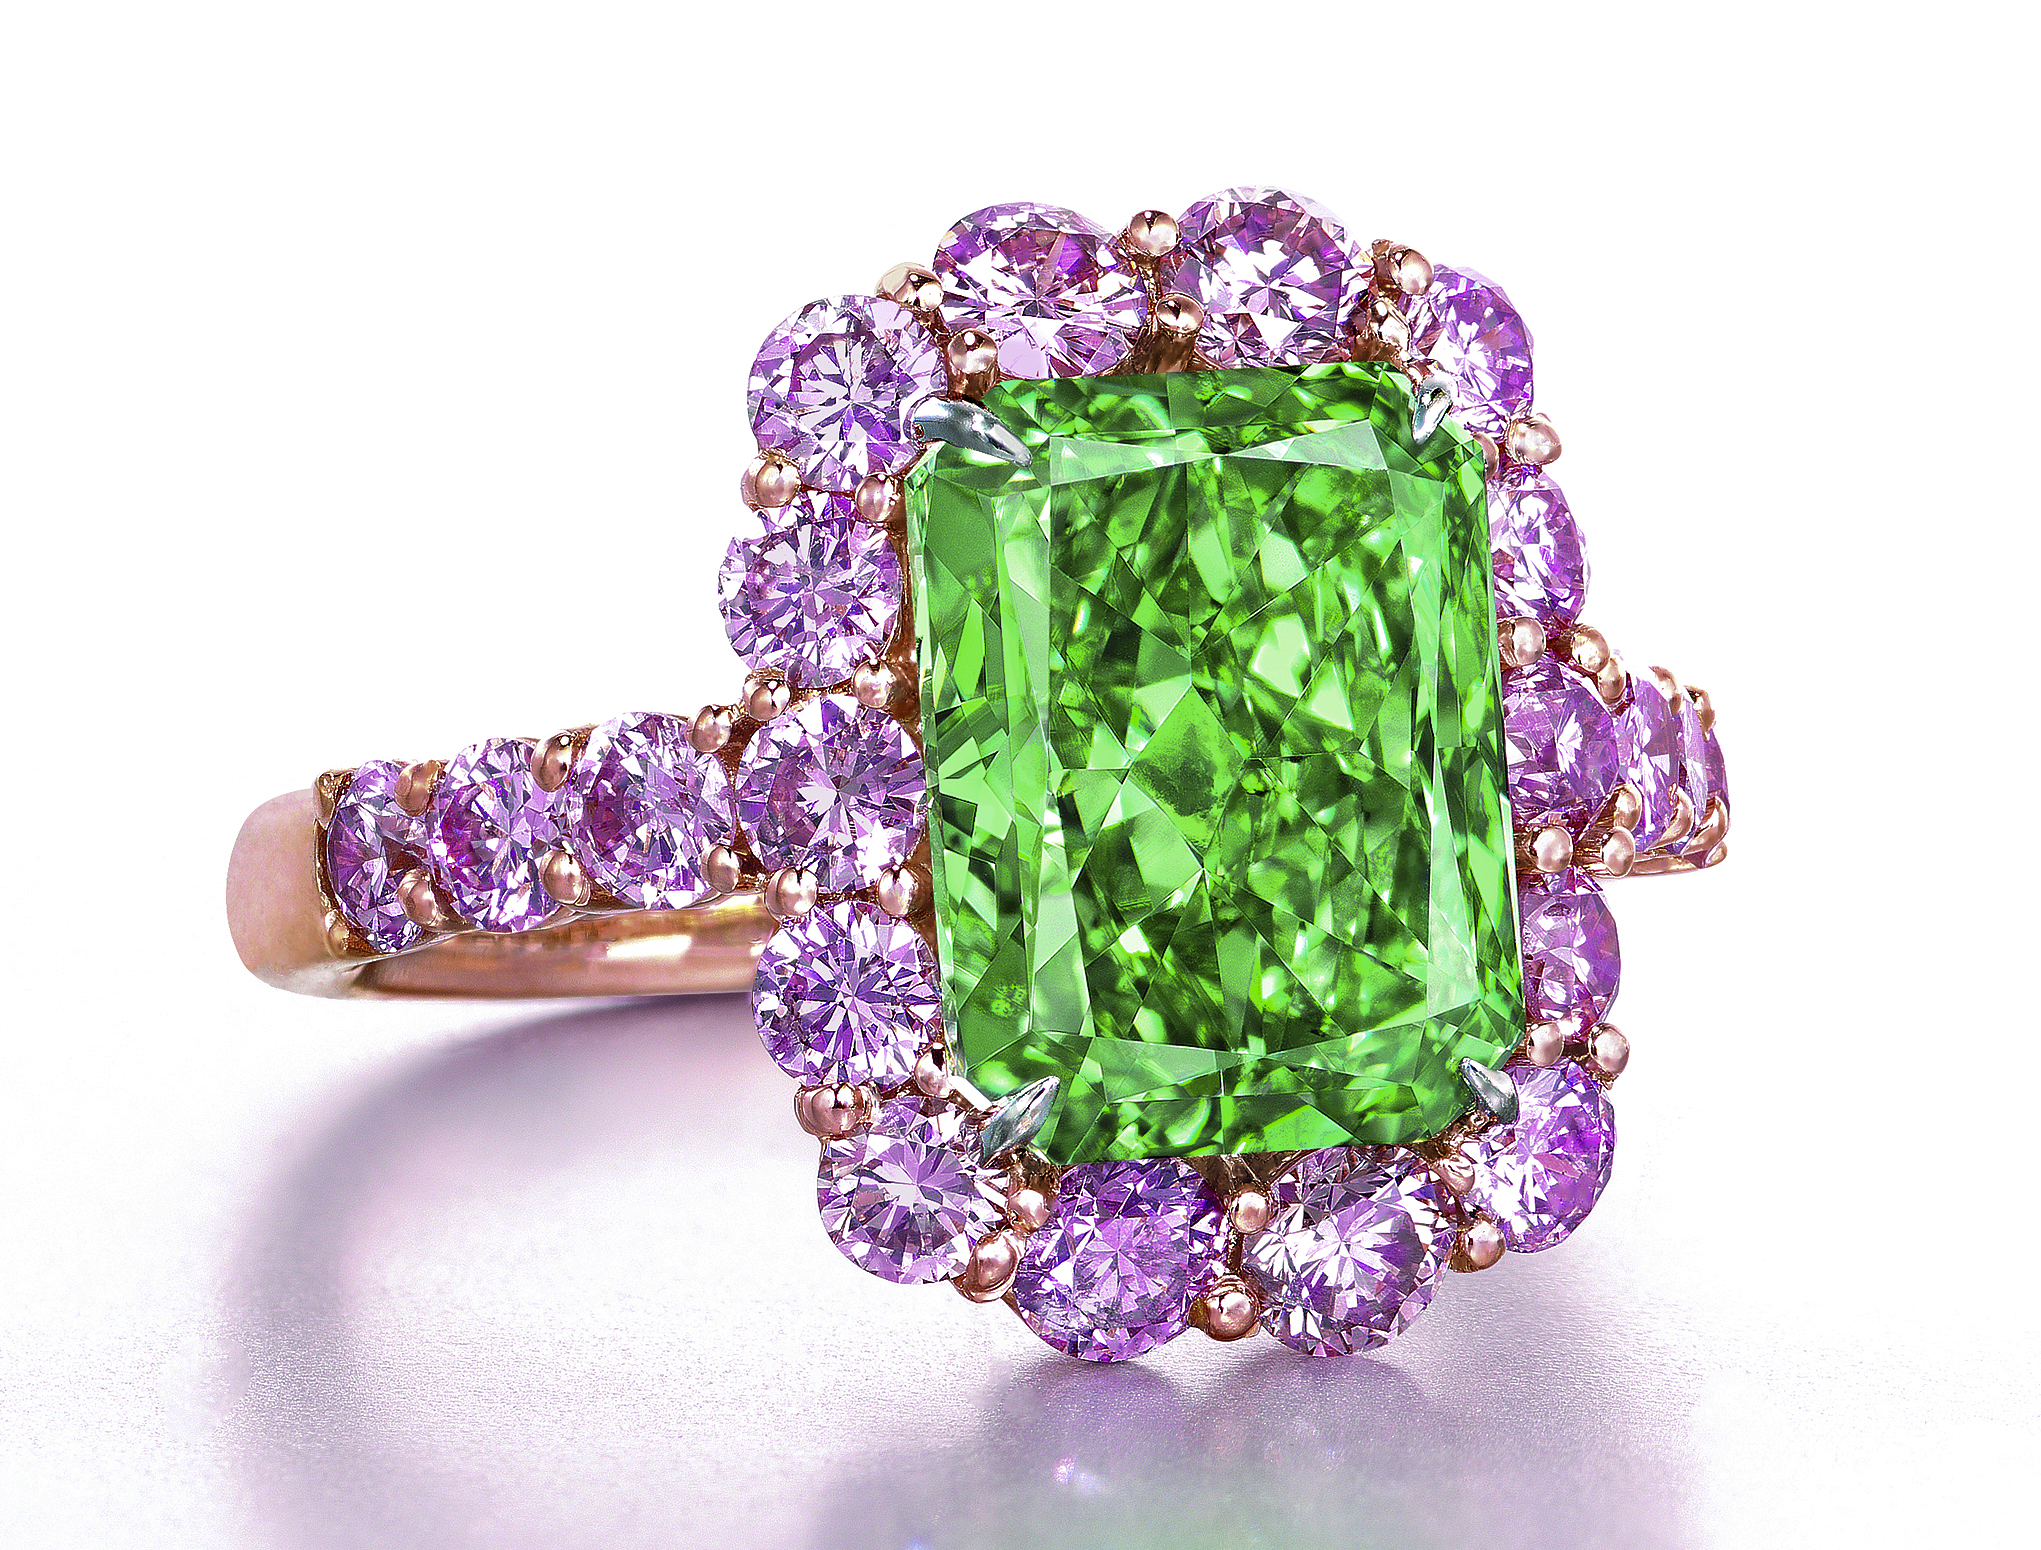 In June this year, a 5.03ct Aurora Green diamond was sold to Chow Tai Fook for HK$130 million. Photo: Christie's